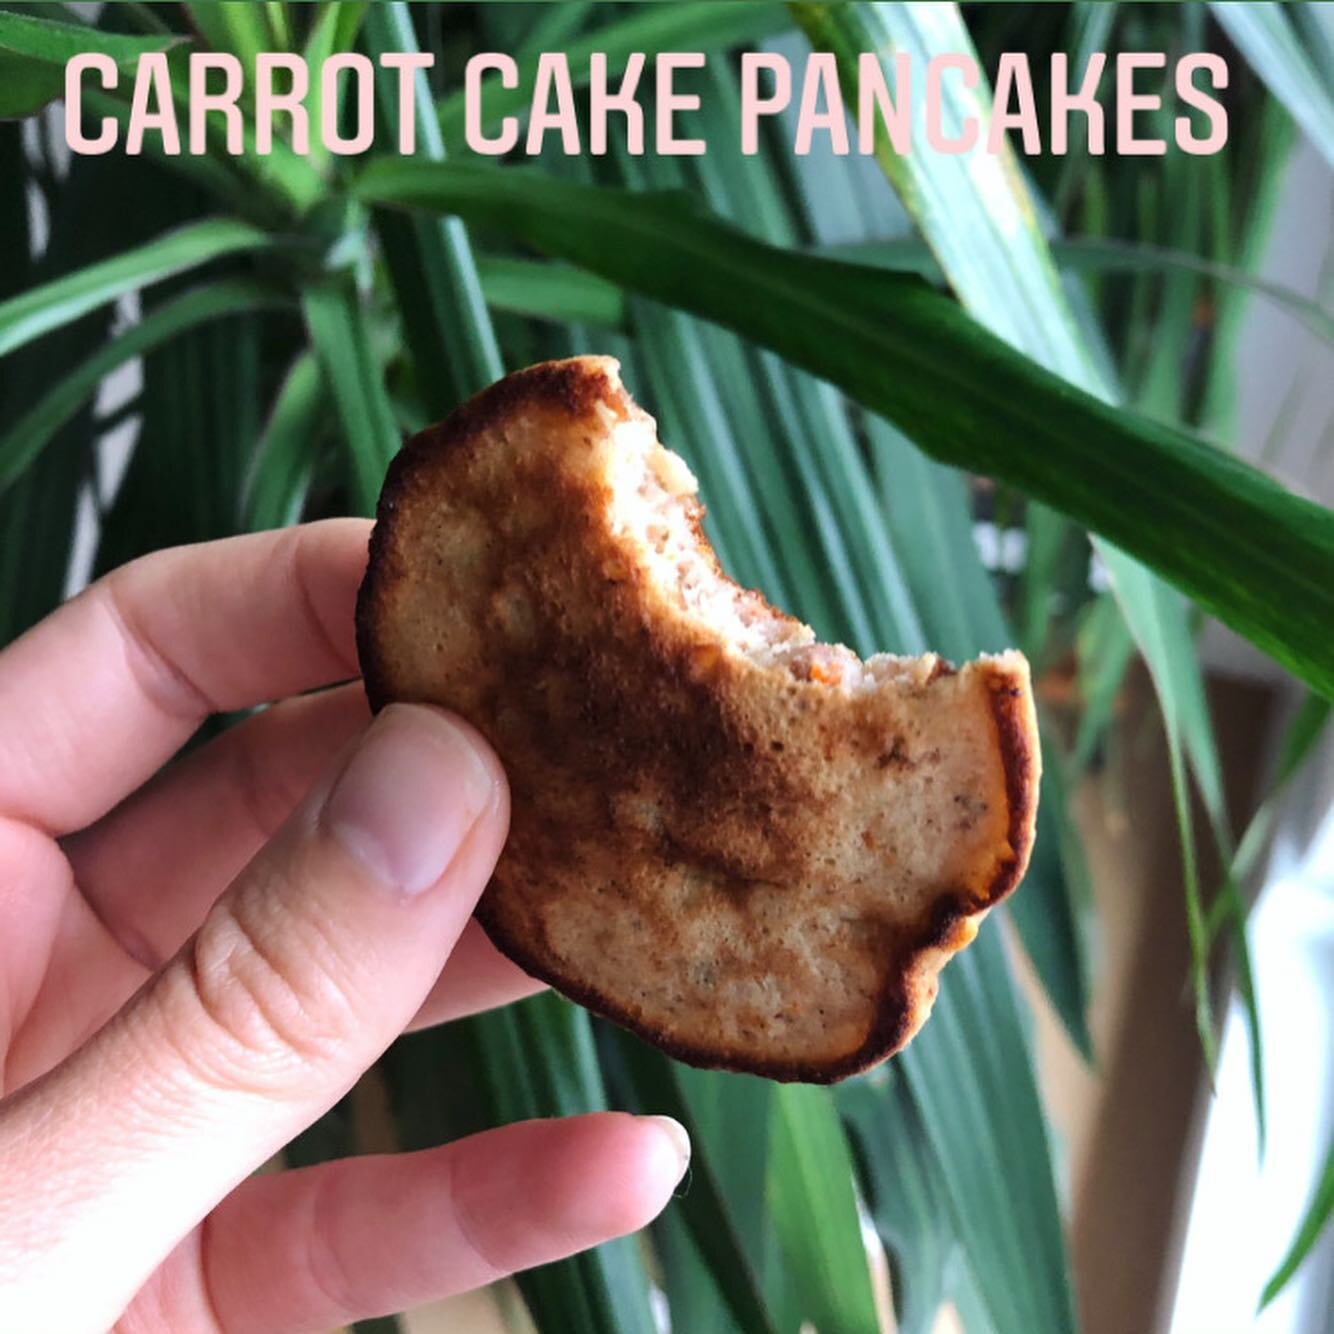 CARROT CAKE PANCAKES. I was inspired by a recipe in @foodnutrimag and they really do taste like carrot cake 💕 This is a twist to the 3-Ingredient Pancake- so simple, naturally sweet, and slightly crunchy. 

INGREDIENTS:
- 1 ripe banana 
- 1 large or